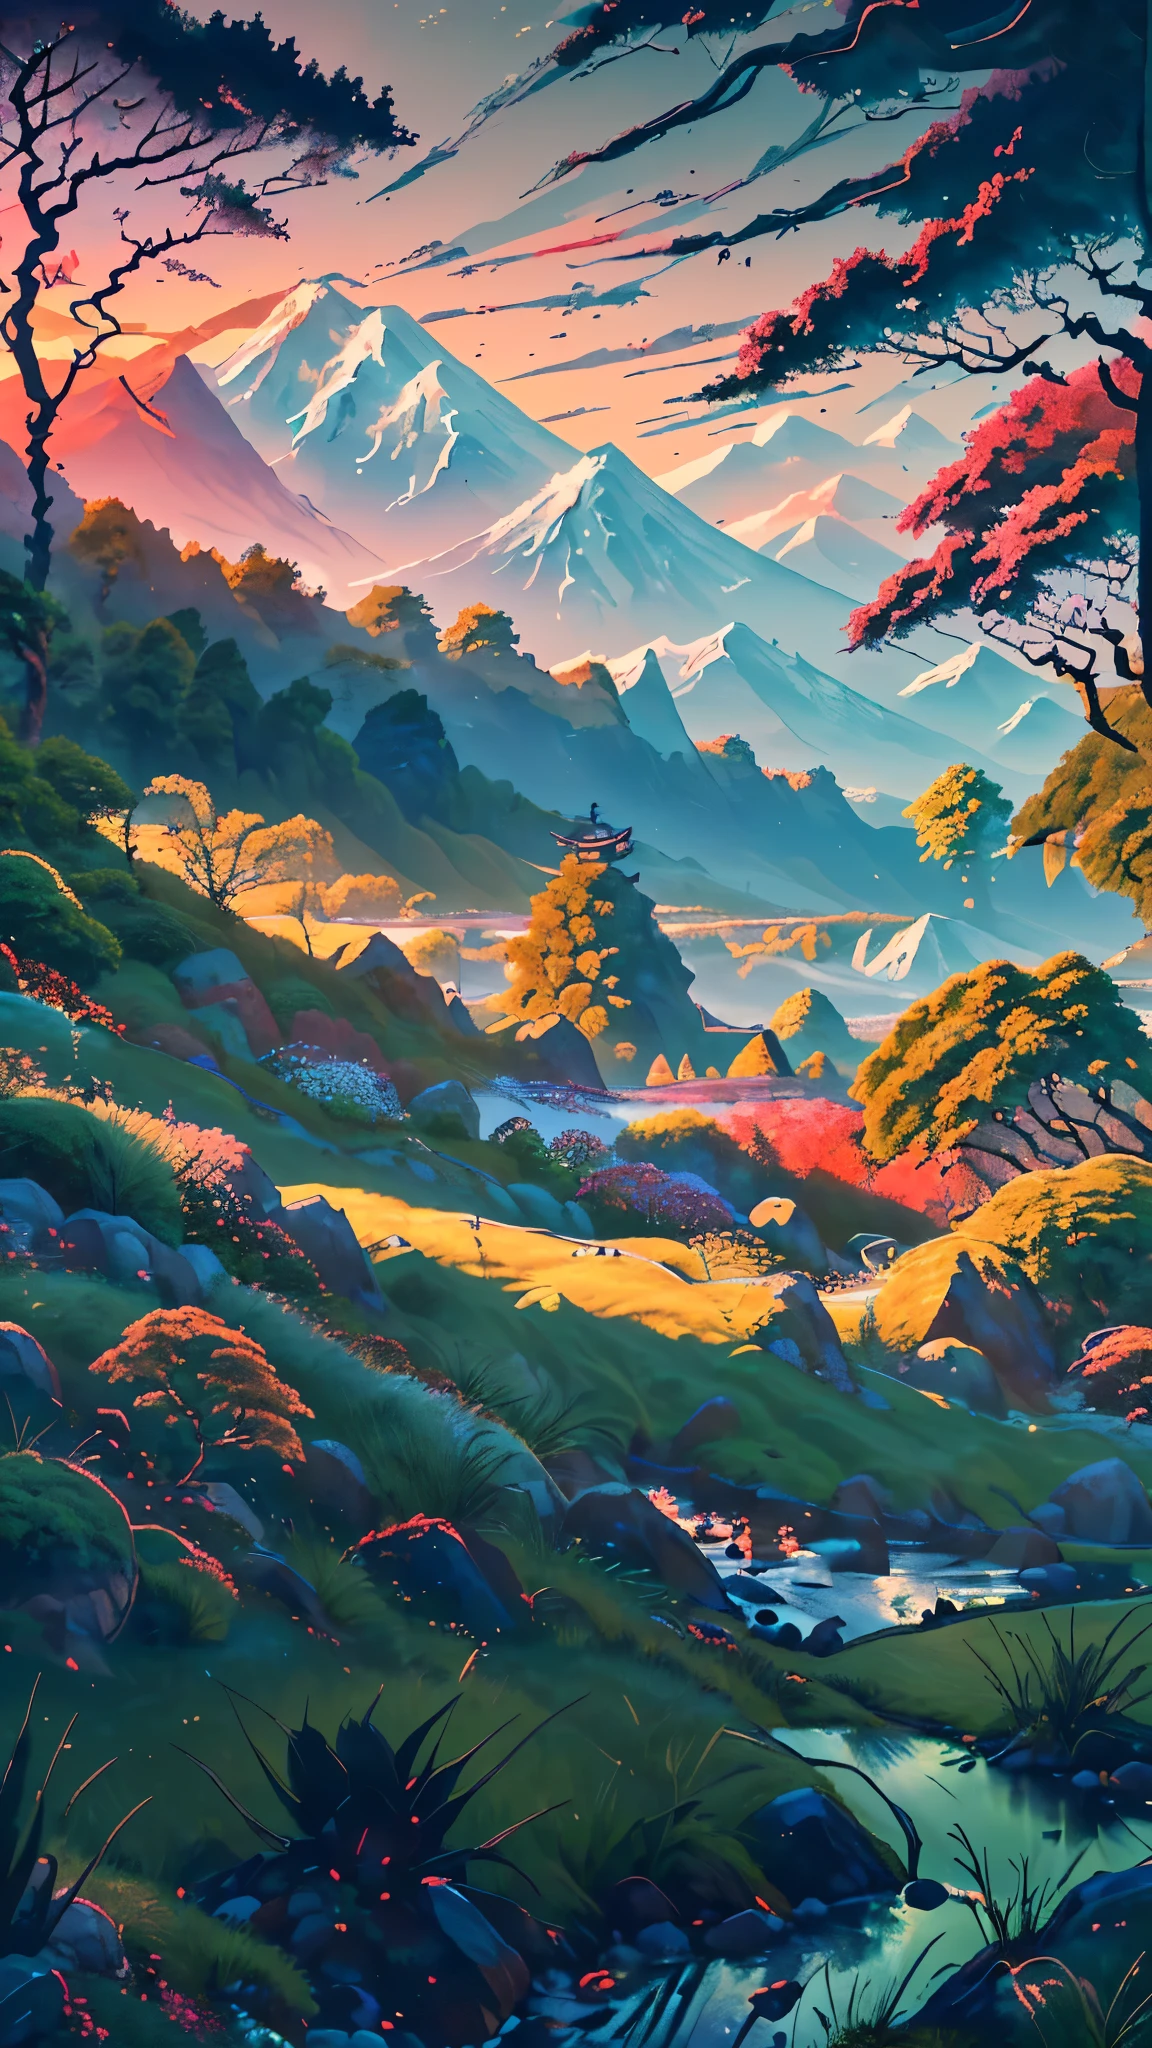 A Japanese valley unfolds with Mount Fuji in the background. Alongside vibrant grass, a slender road meanders, accompanied by the presence of tall trees, enhancing the serene beauty of the landscape.